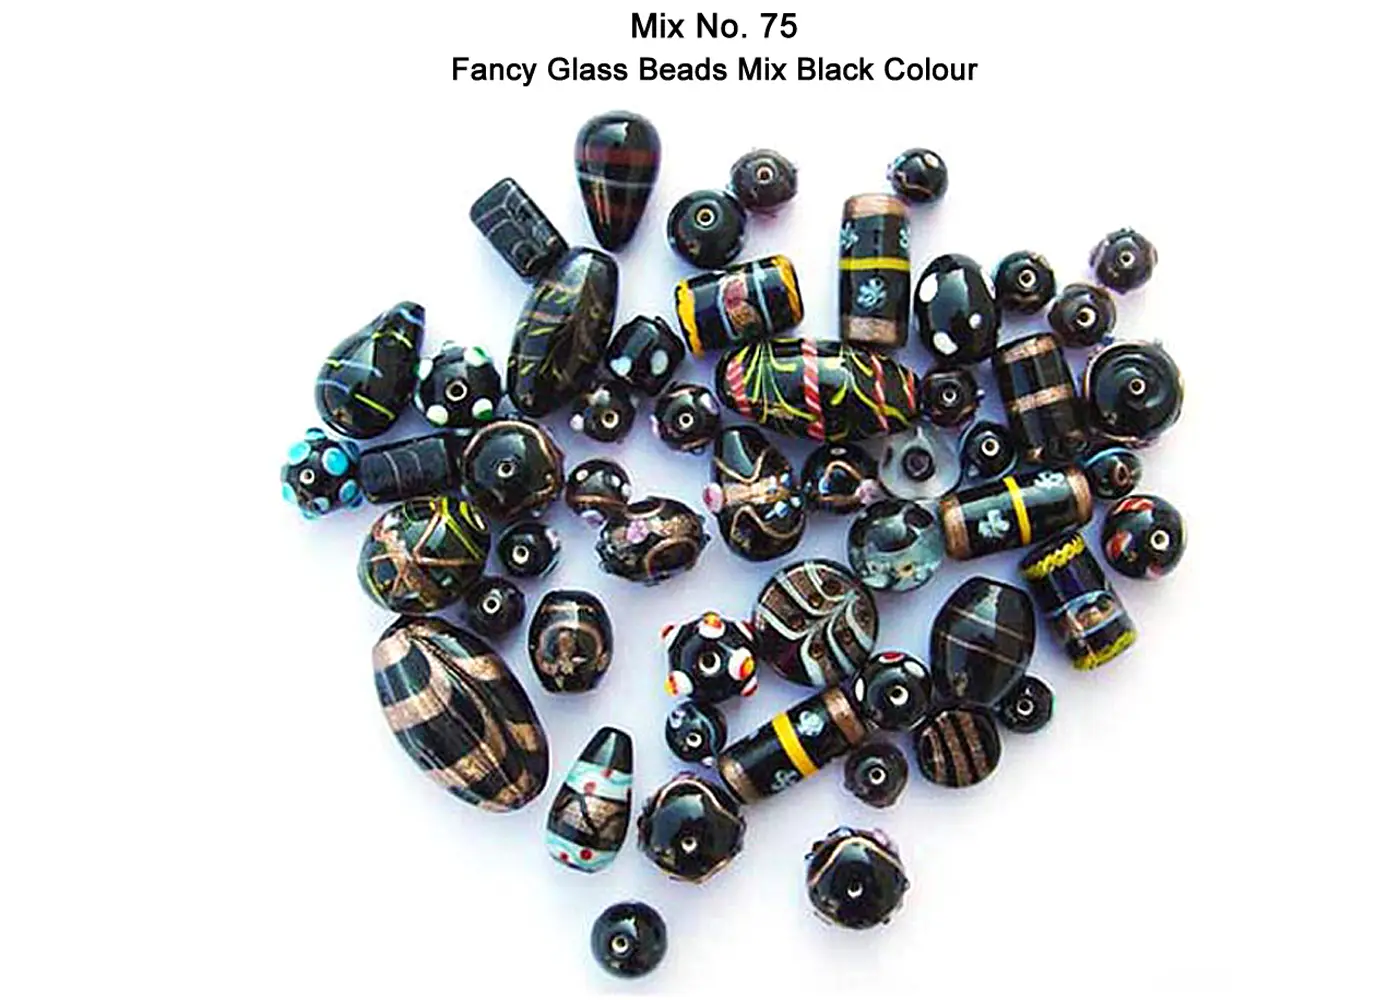 Fancy Glass Beads in Black color